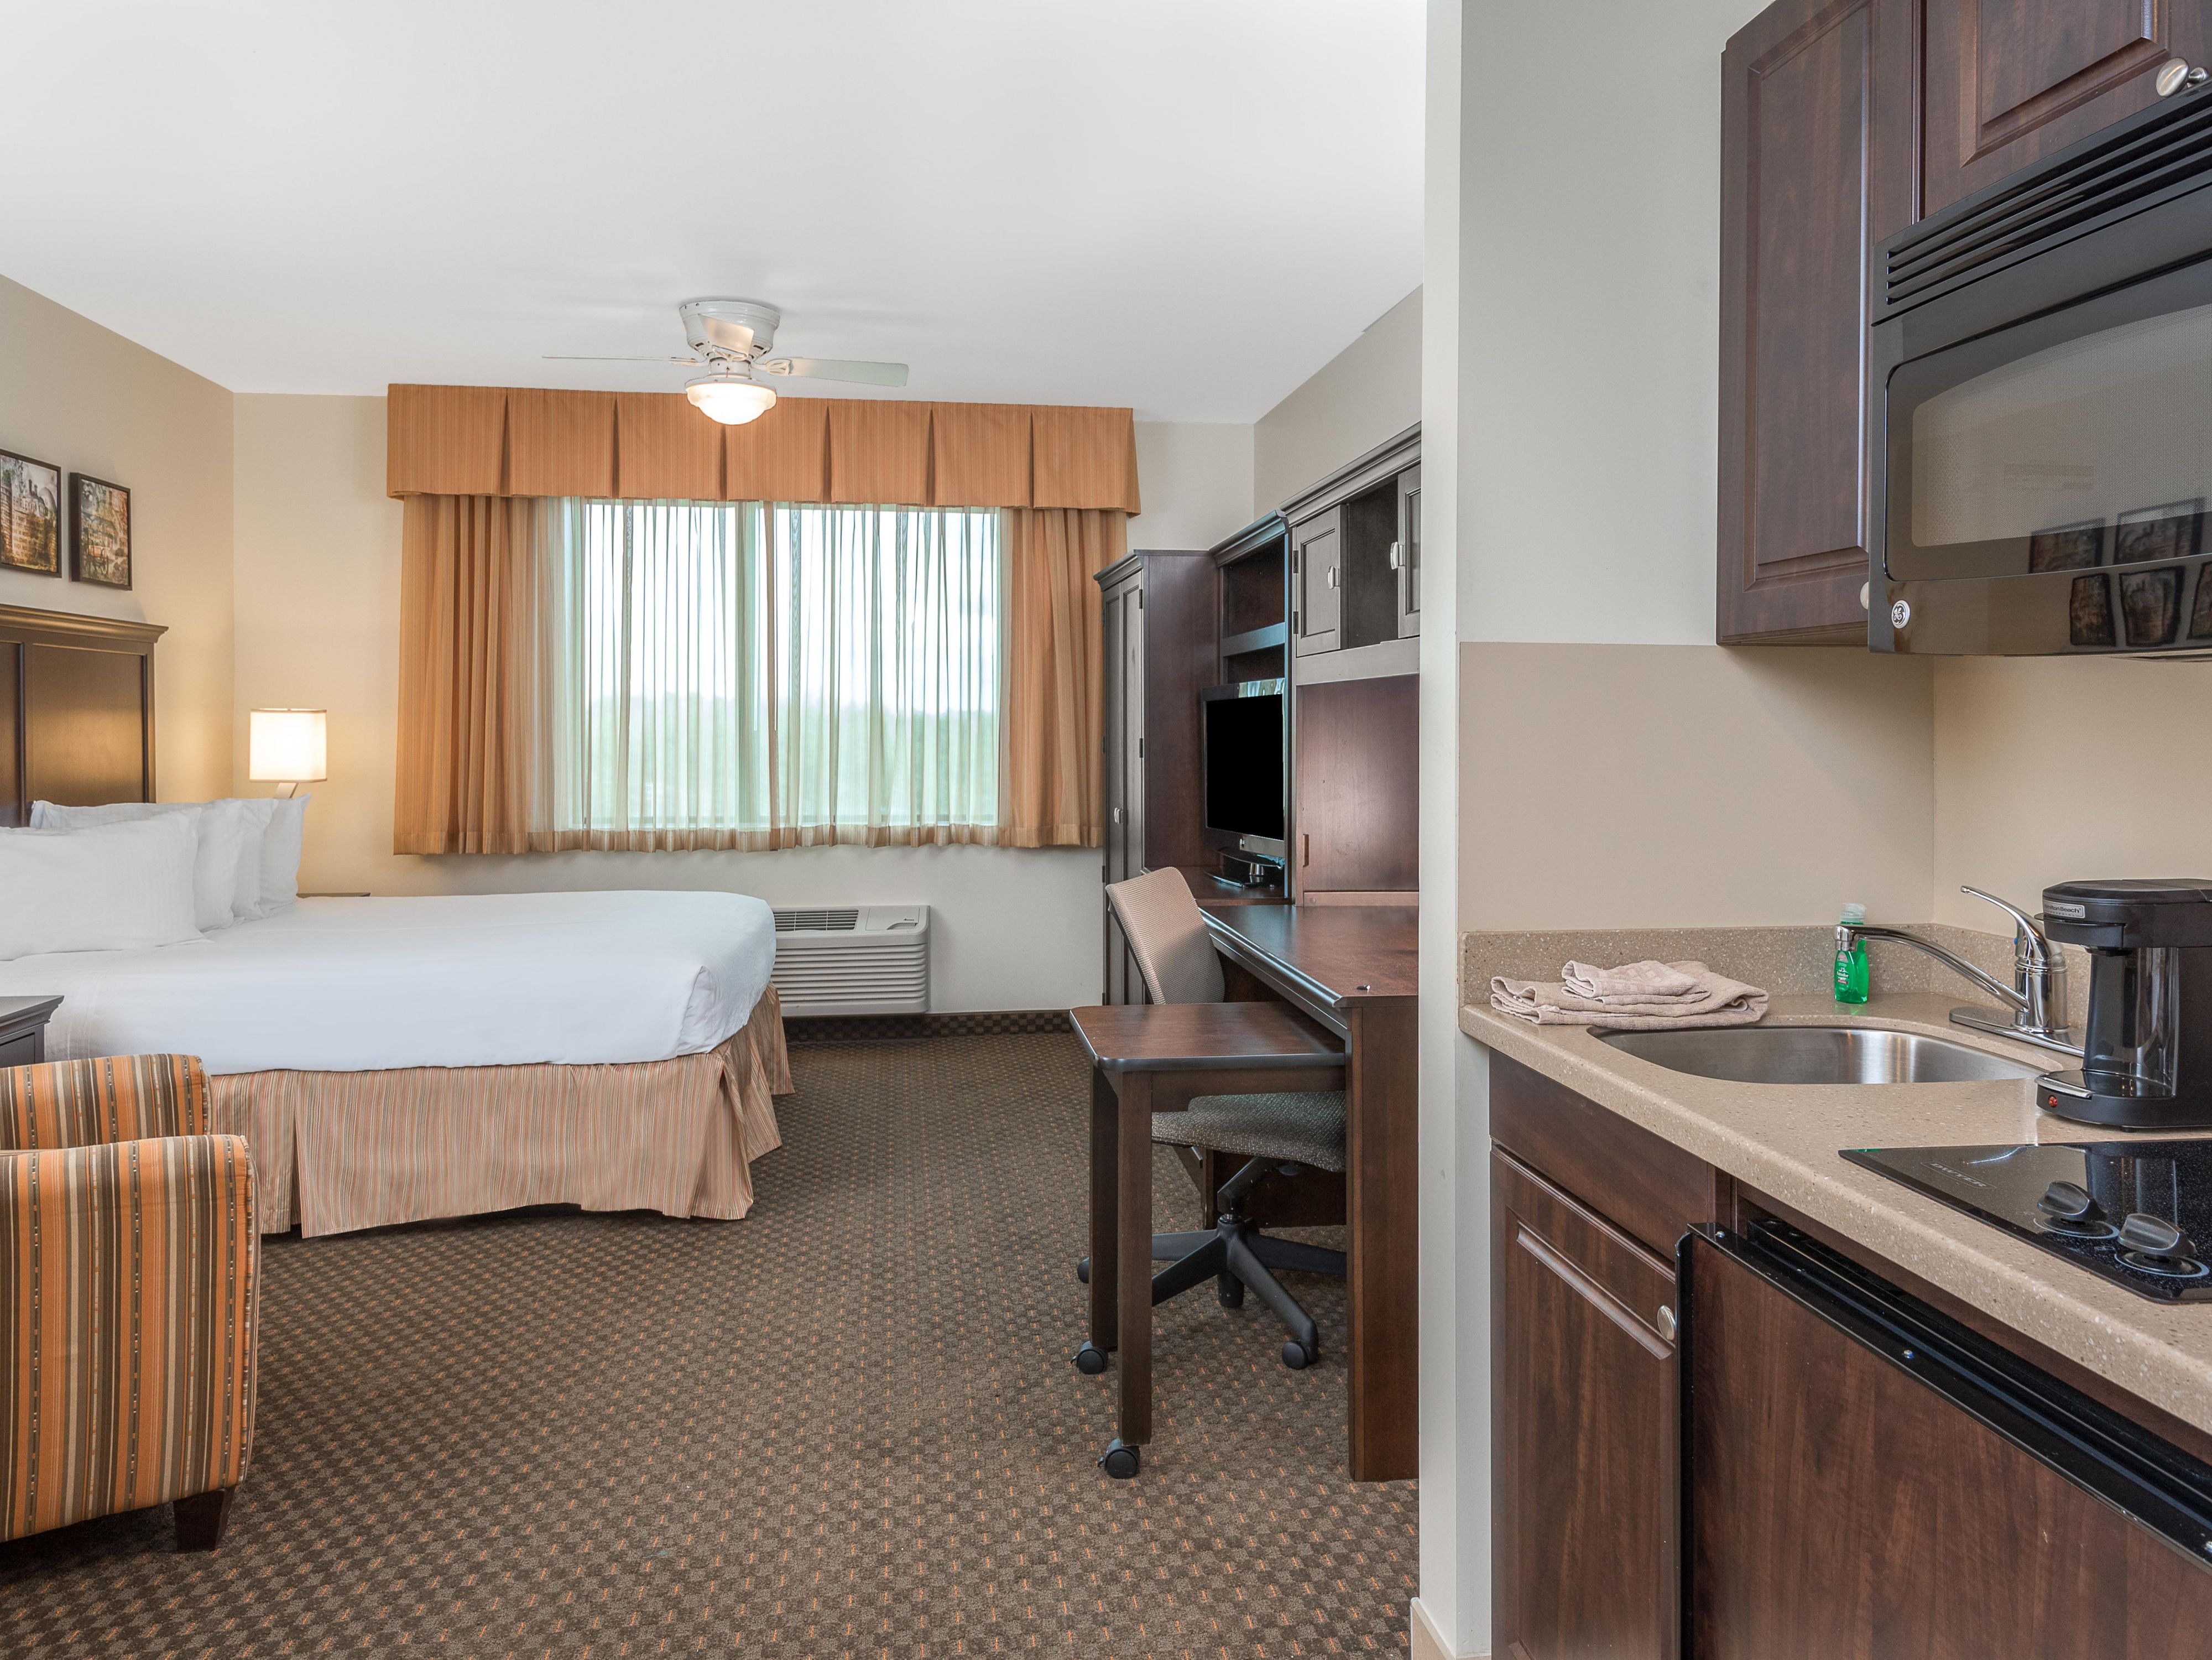 Rooms and Rates for IHG Army Hotels Fort Lee Lodge at Fort Lee